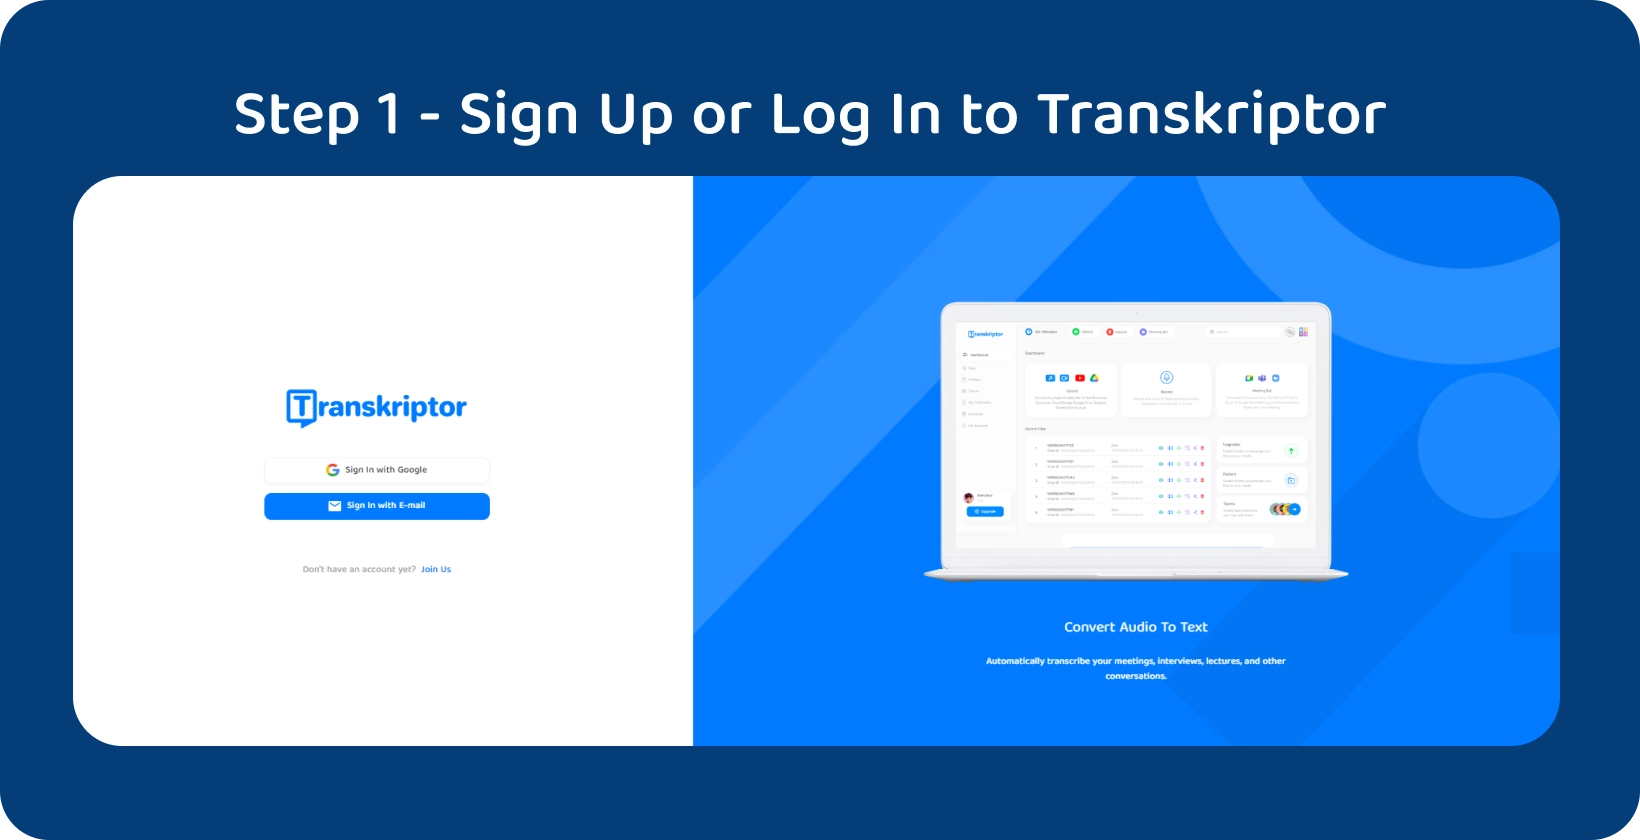 Transkriptor login screen and interface showcasing features for converting audio to text, for transcribing voicemails efficiently.